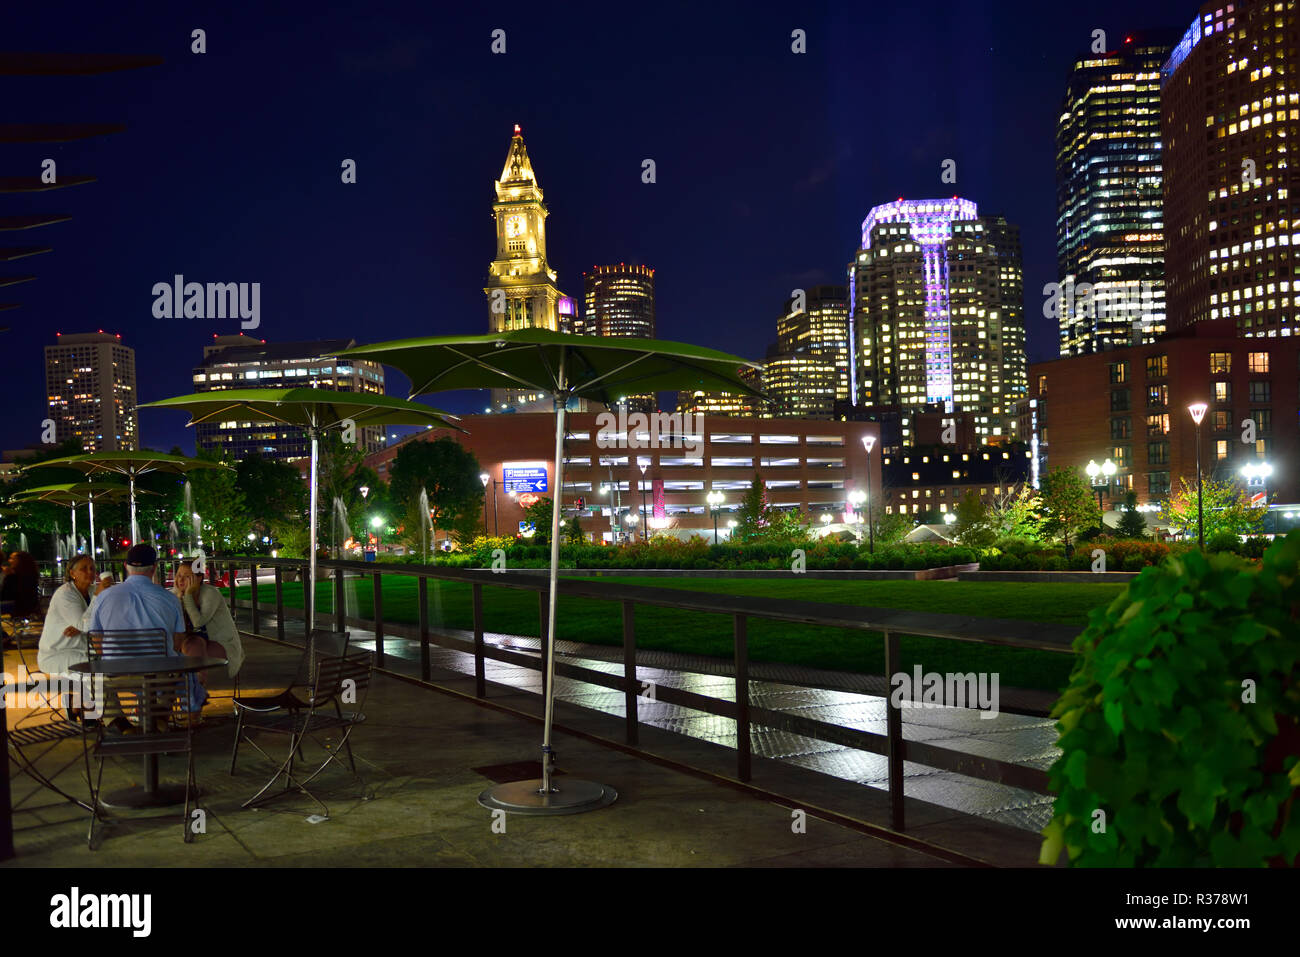 Night scene of open plaza and park with tall buildings of Boston financial district behind, Massachusetts, USA Stock Photo